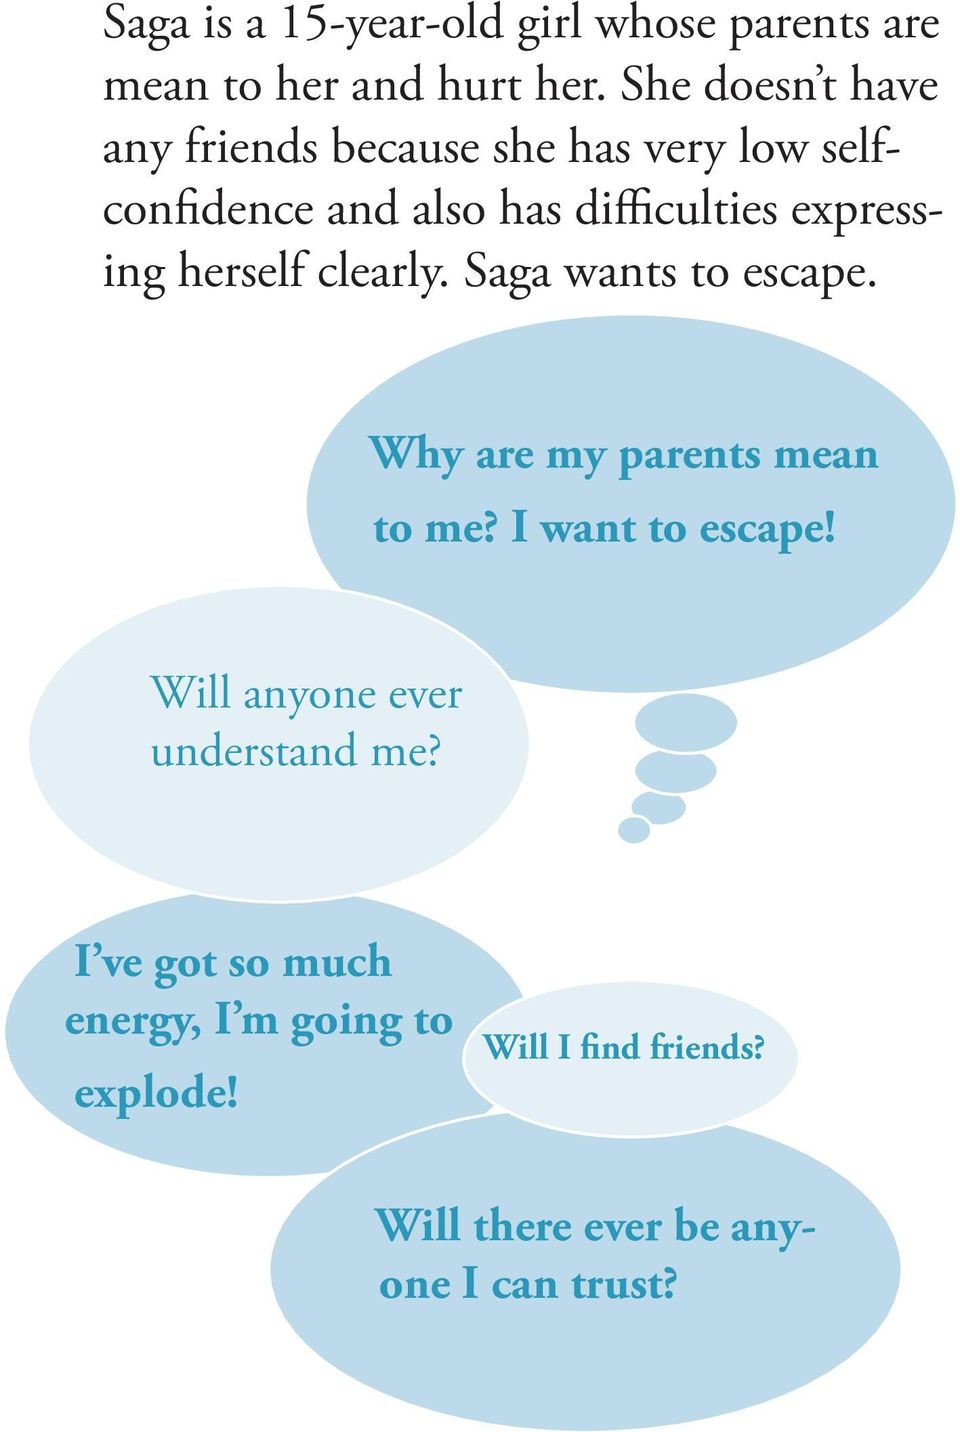 expressing herself clearly. Saga wants to escape. Why are my parents mean to me? I want to escape!